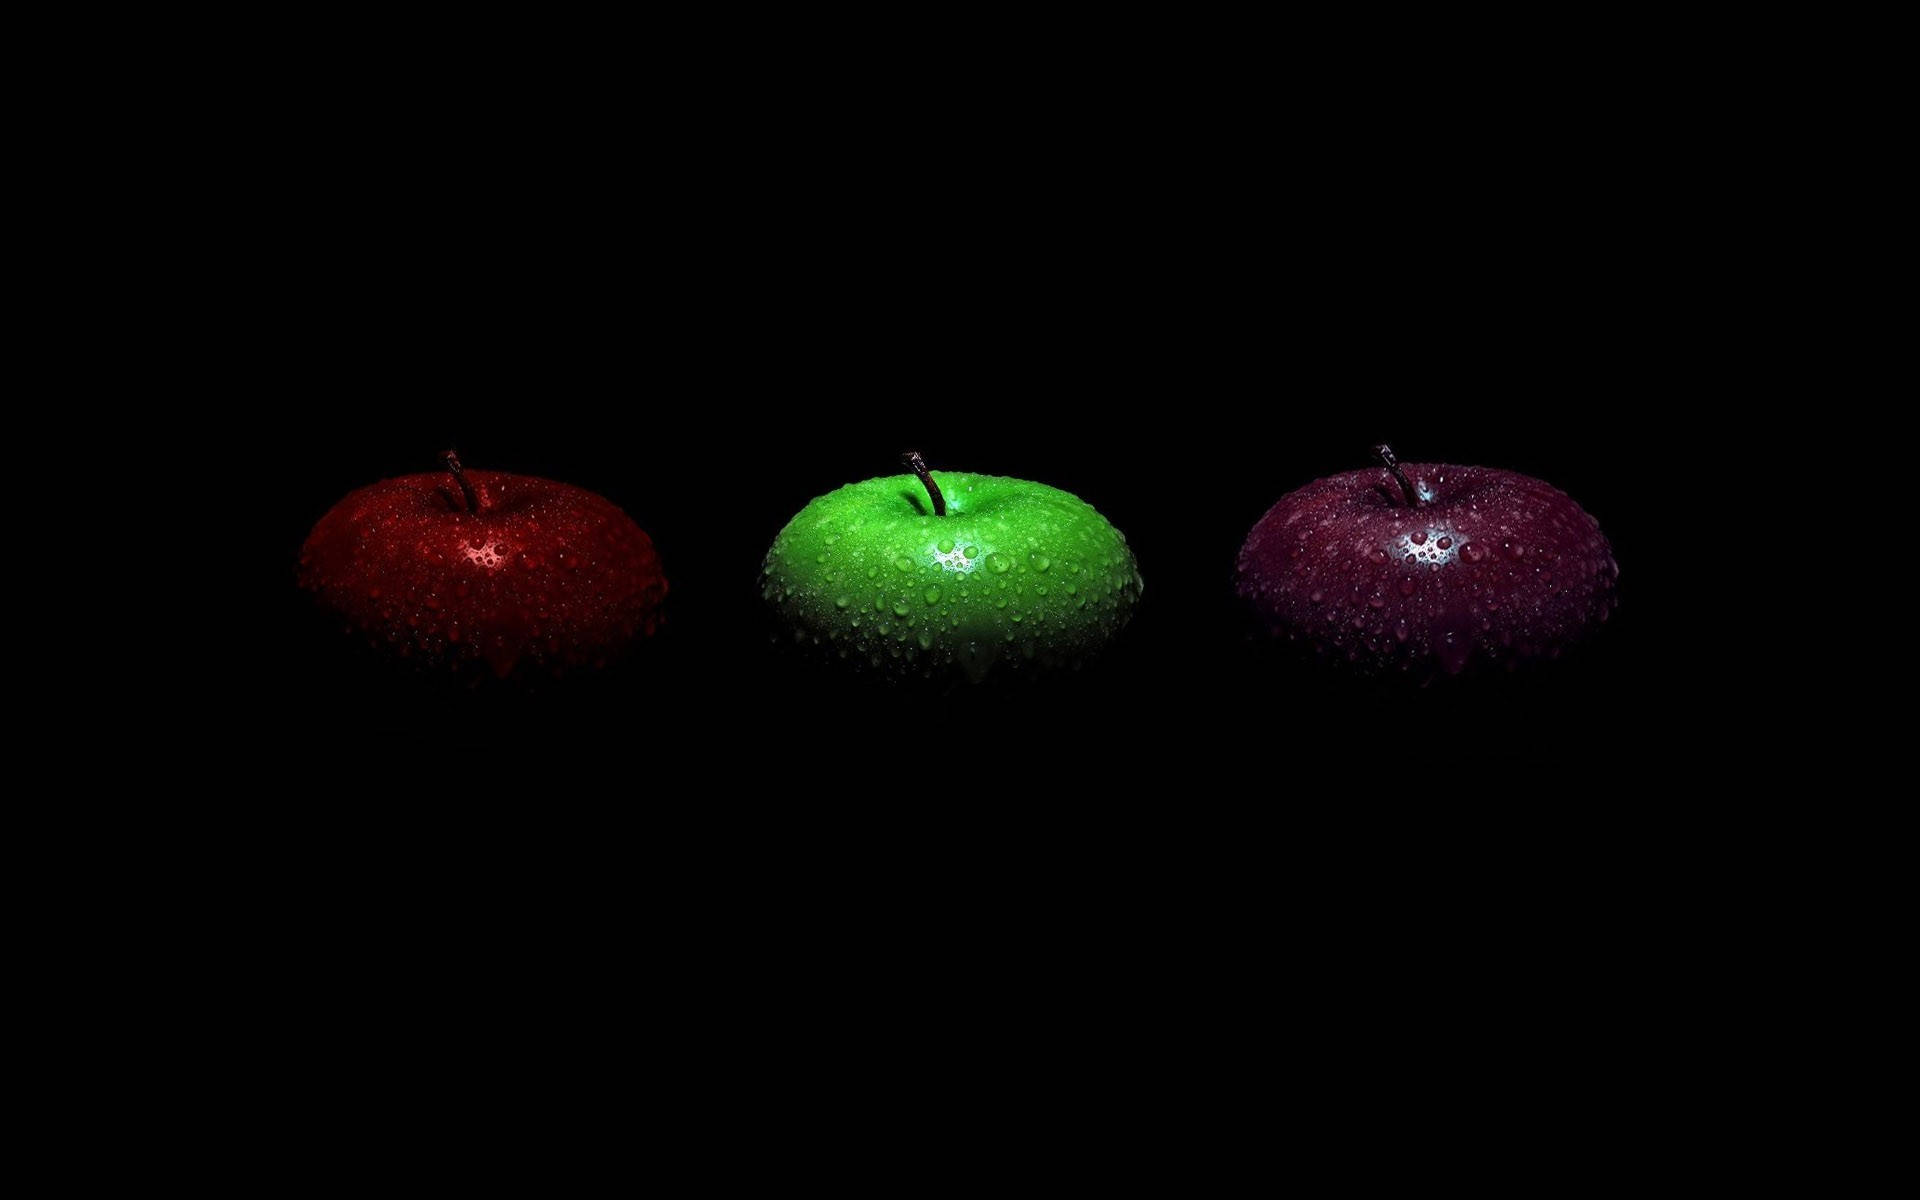 Black Color Background With Three Apples Background